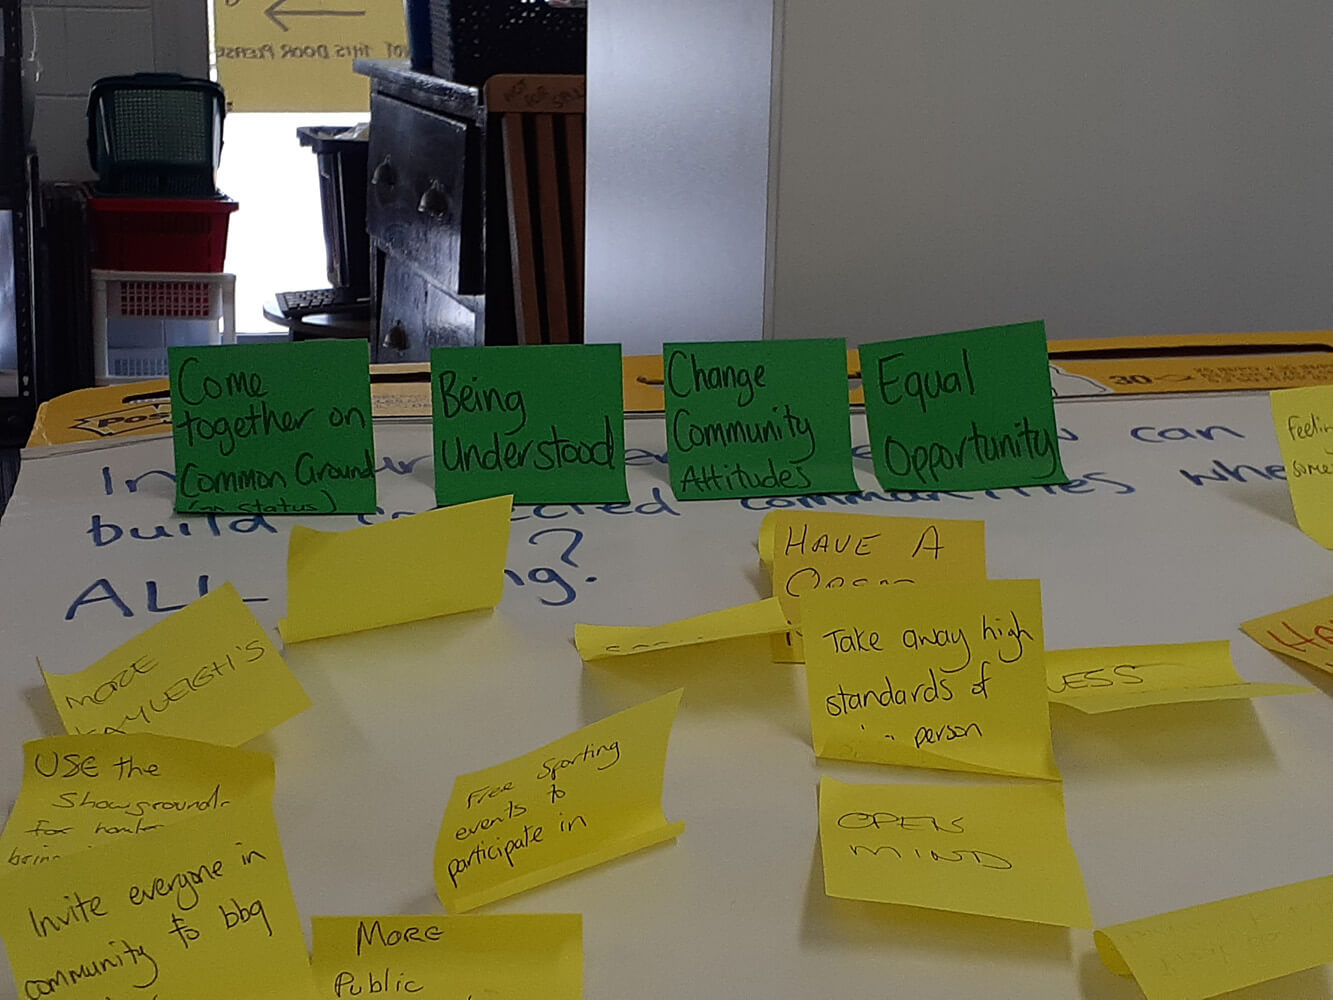 Close up image of green and yellow post-it notes with notes from the focus group on them.